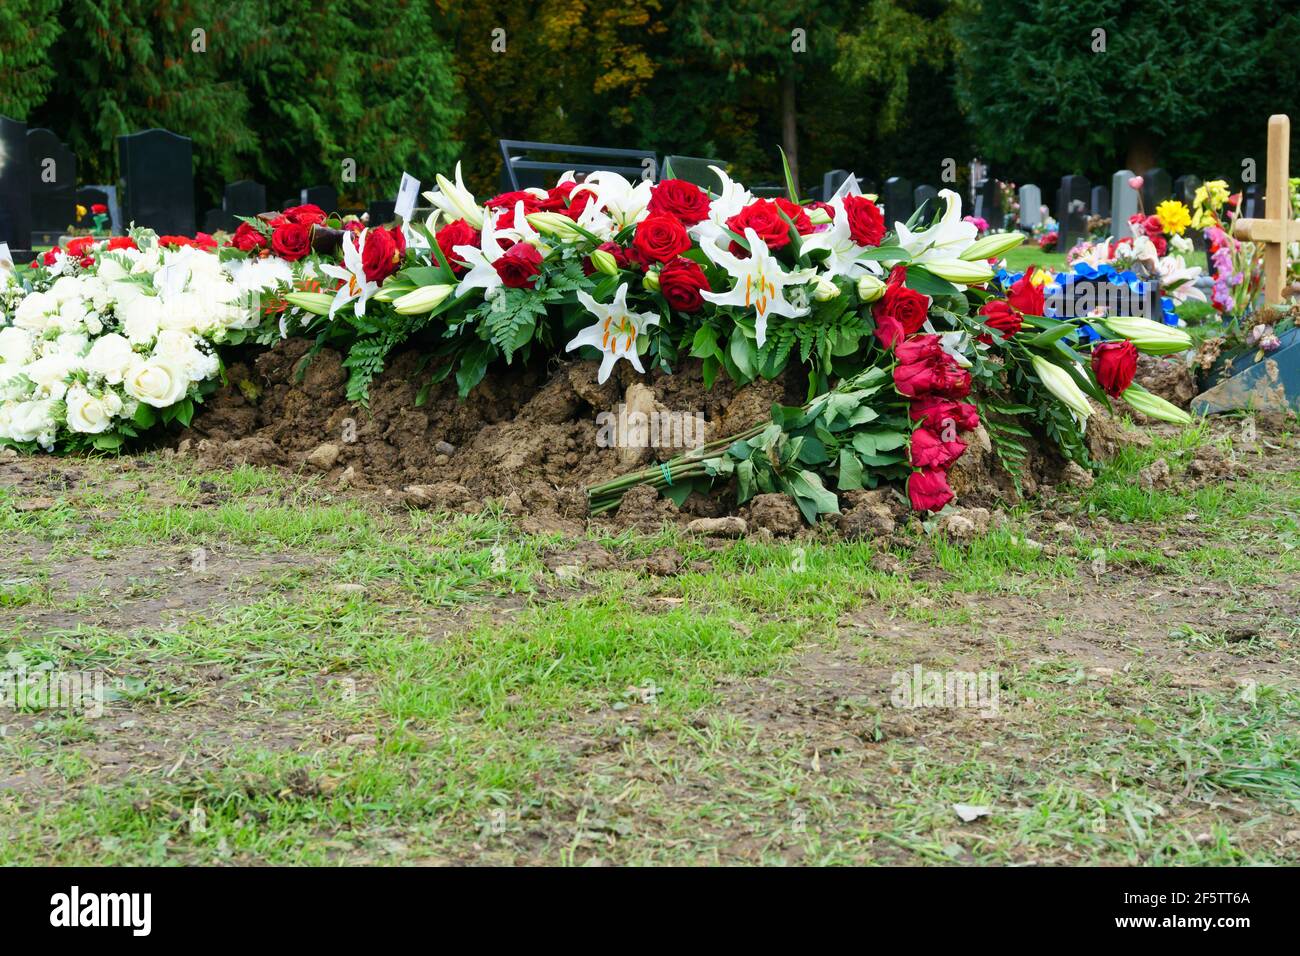 Newly dug grave after a funeral with floral tributes in a typical cemetery in the UK Stock Photo